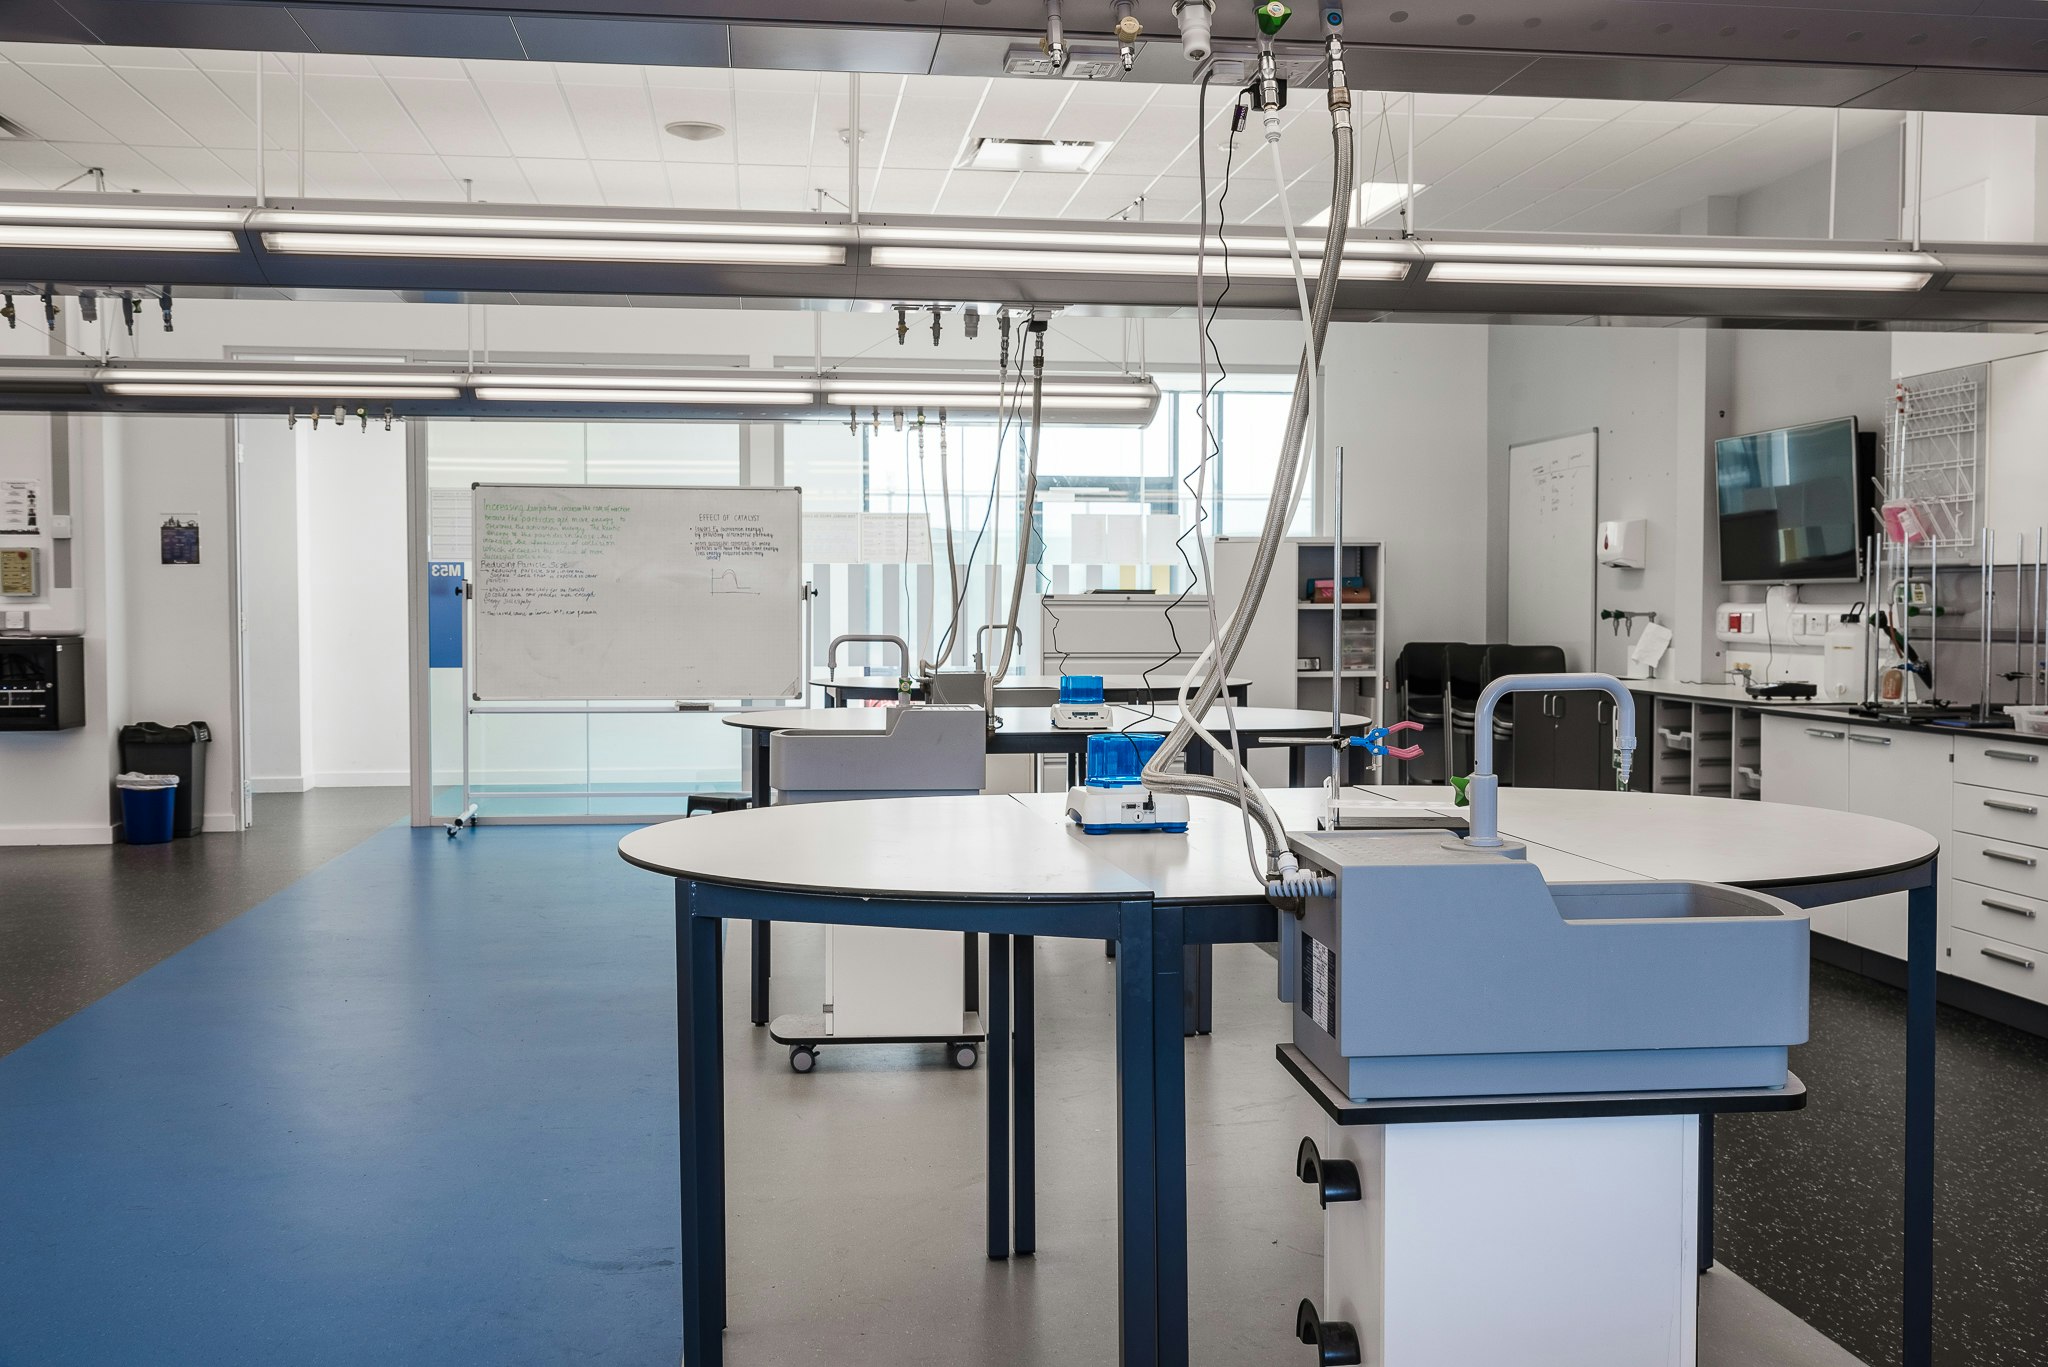 London Academy of Excellence Tottenham - Science classroom / Laboratory image 9